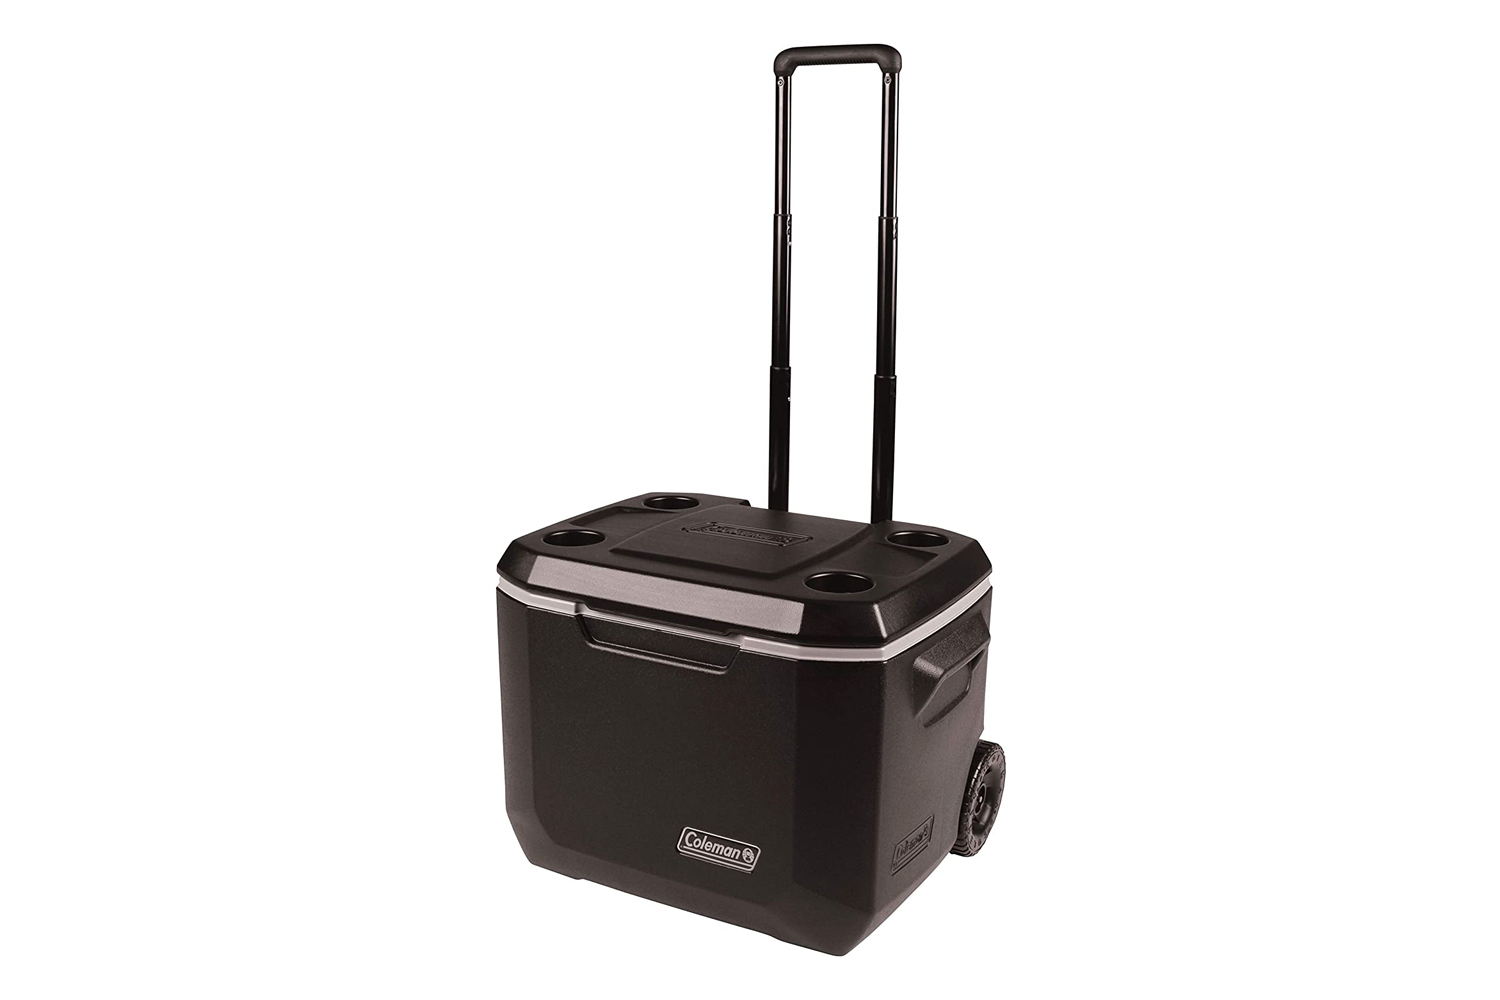 https://www.themanual.com/wp-content/uploads/sites/9/2021/10/coleman-xtreme-5-day-rolling-cooler.jpg?fit=800%2C800&p=1